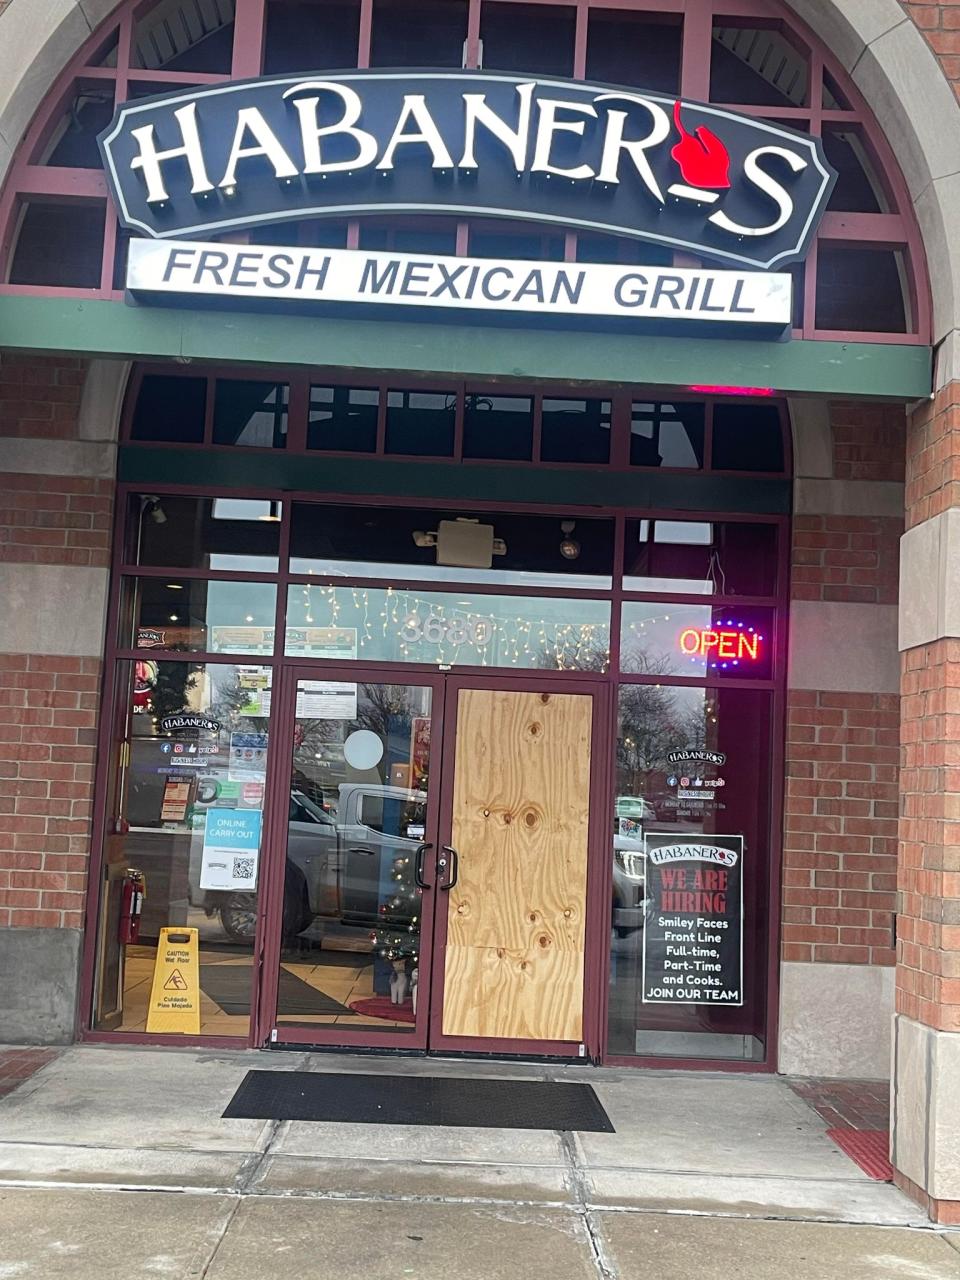 Staff at Habaneros had to board up a door that a suspect smashed through. (Courtesy Photo/Habaneros Fresh Mexican Grill)